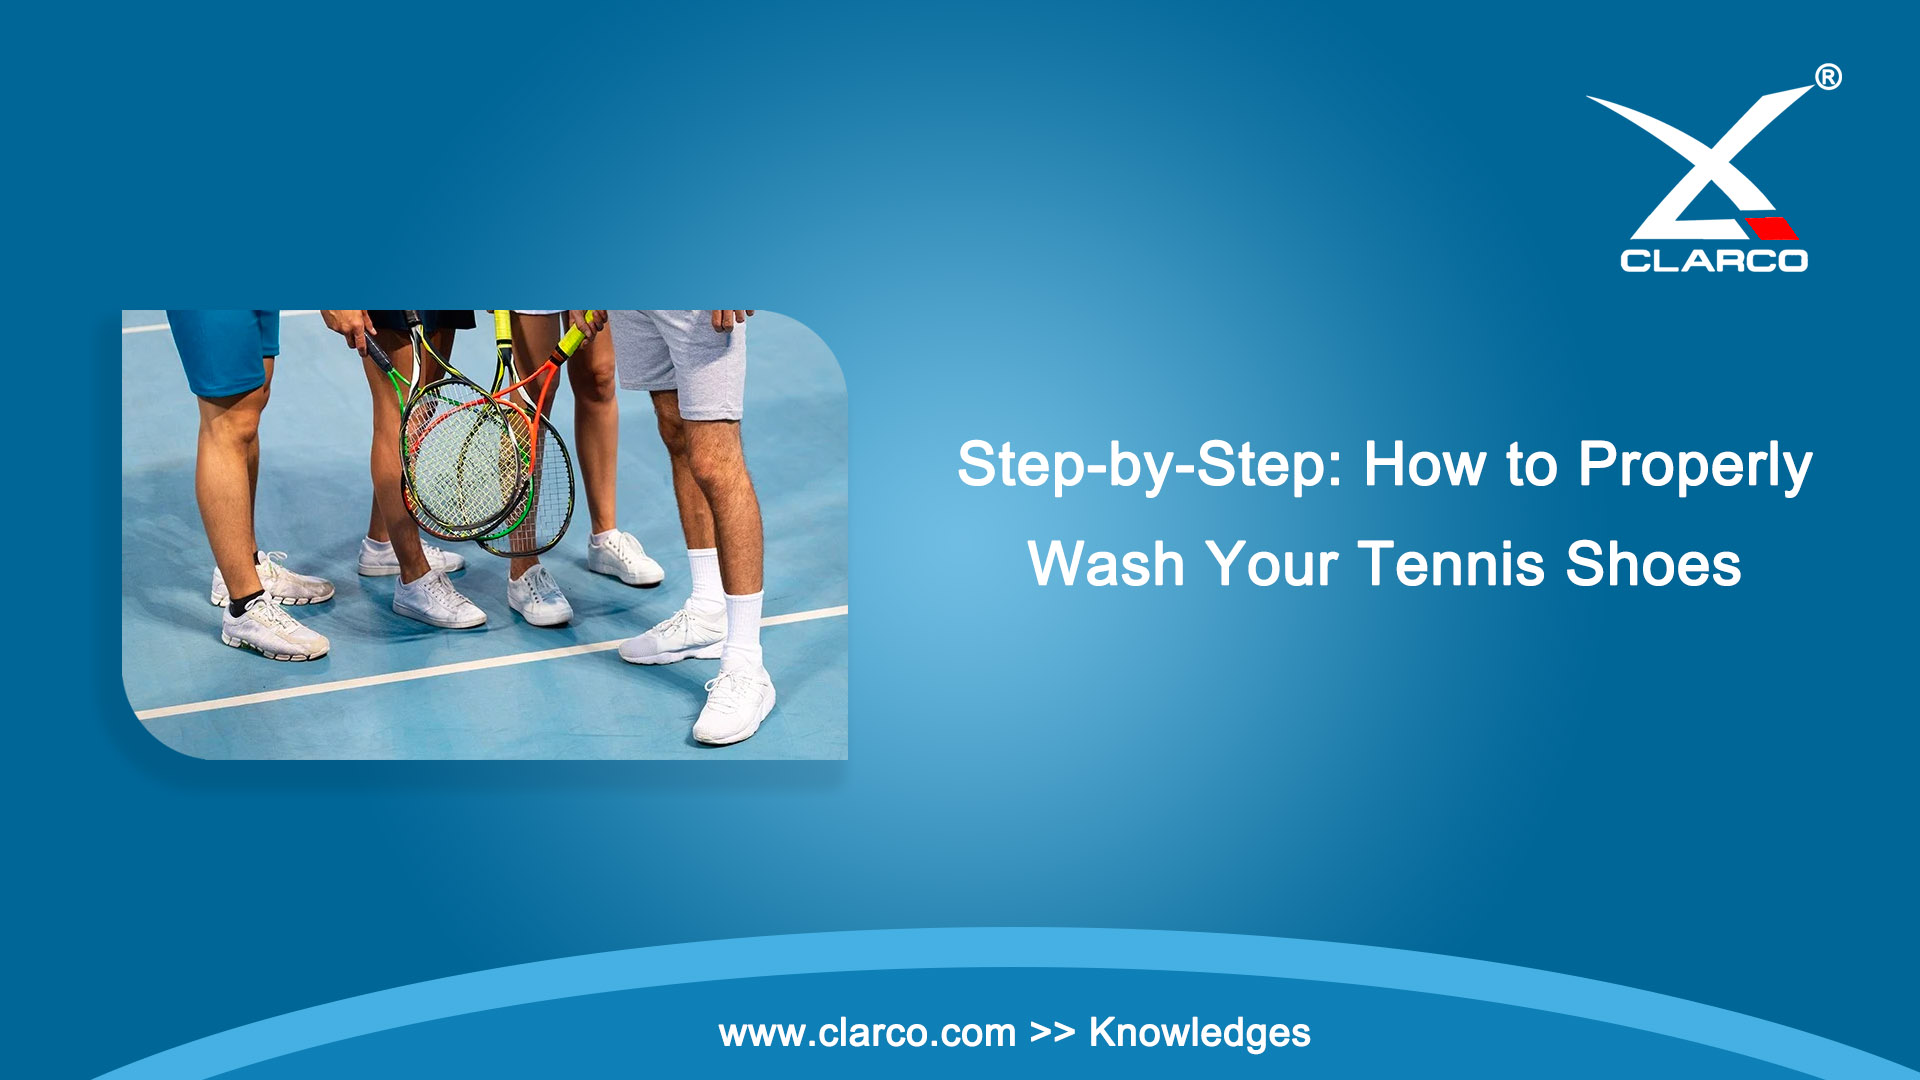 How to Properly Wash Your Tennis Shoes